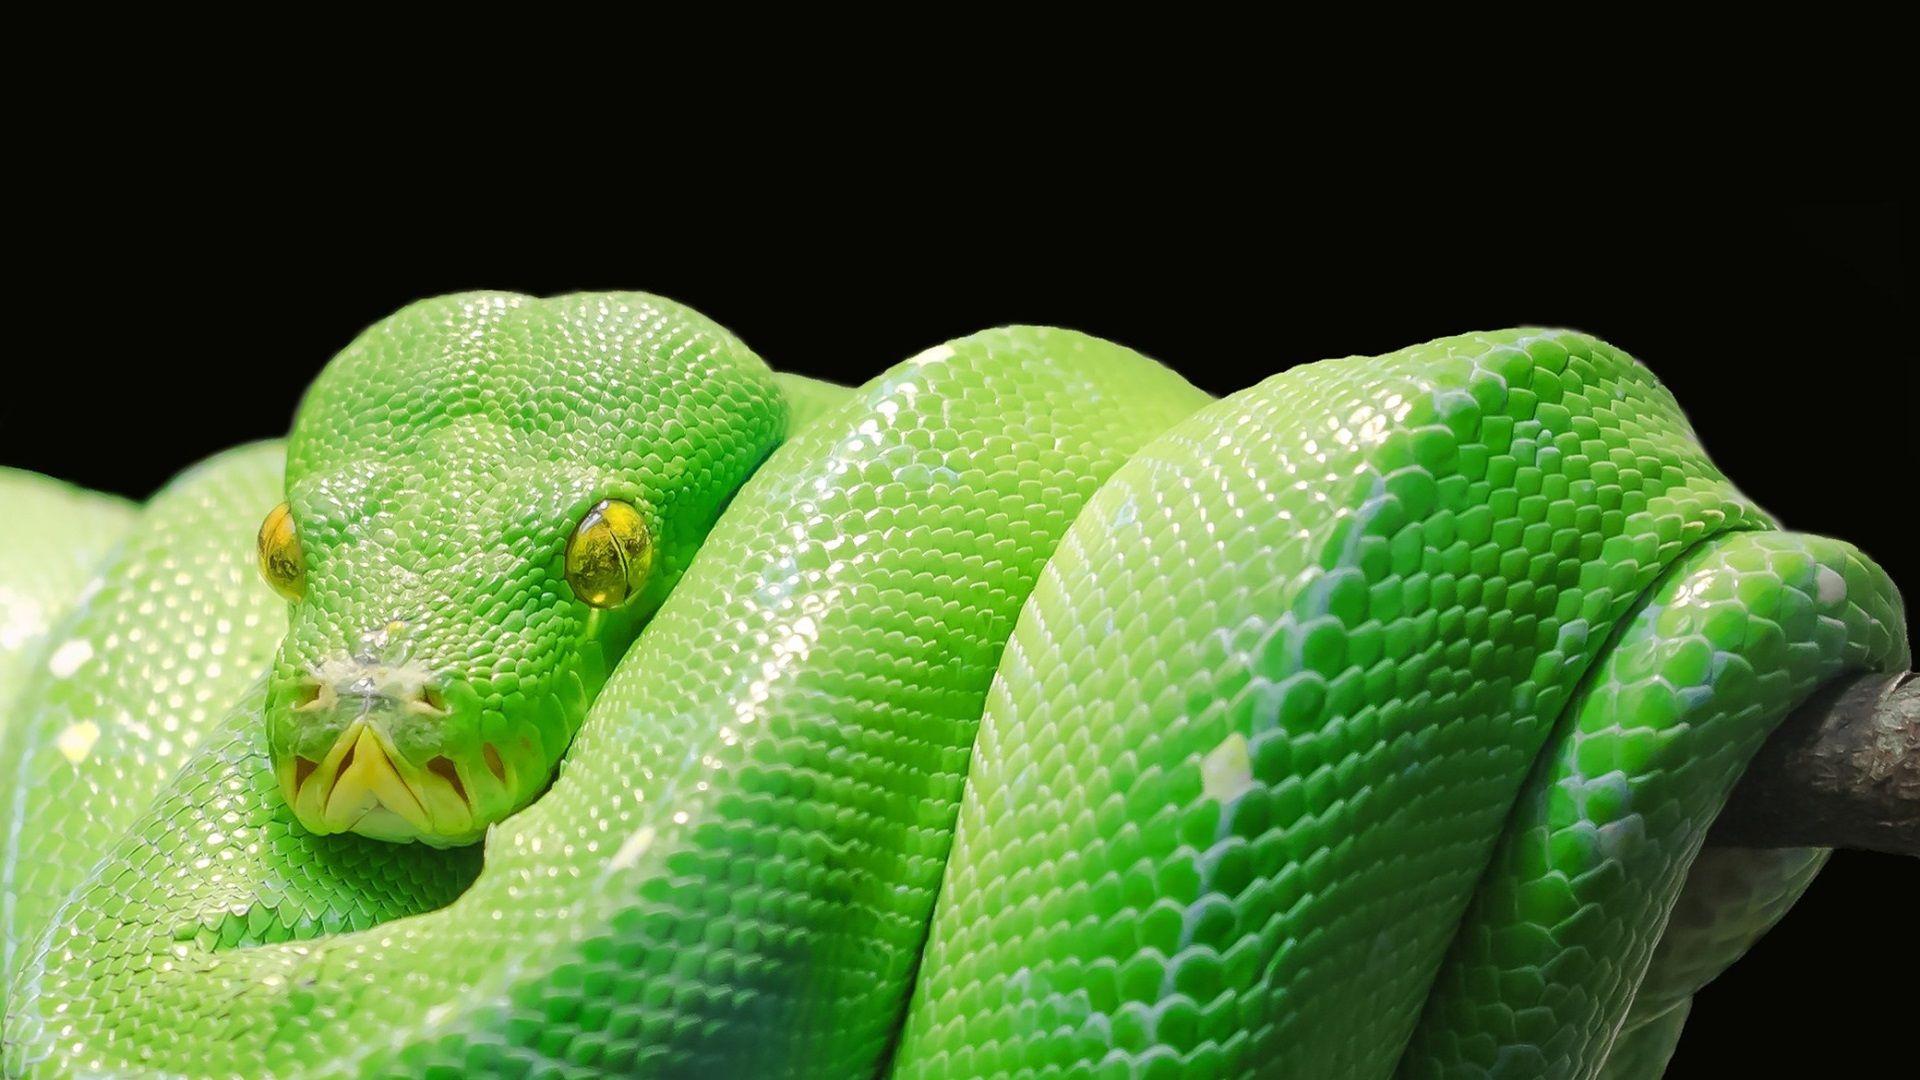 green tree python wallpaper for pc in HD. Snake facts, Snake facts for kids, Green trees